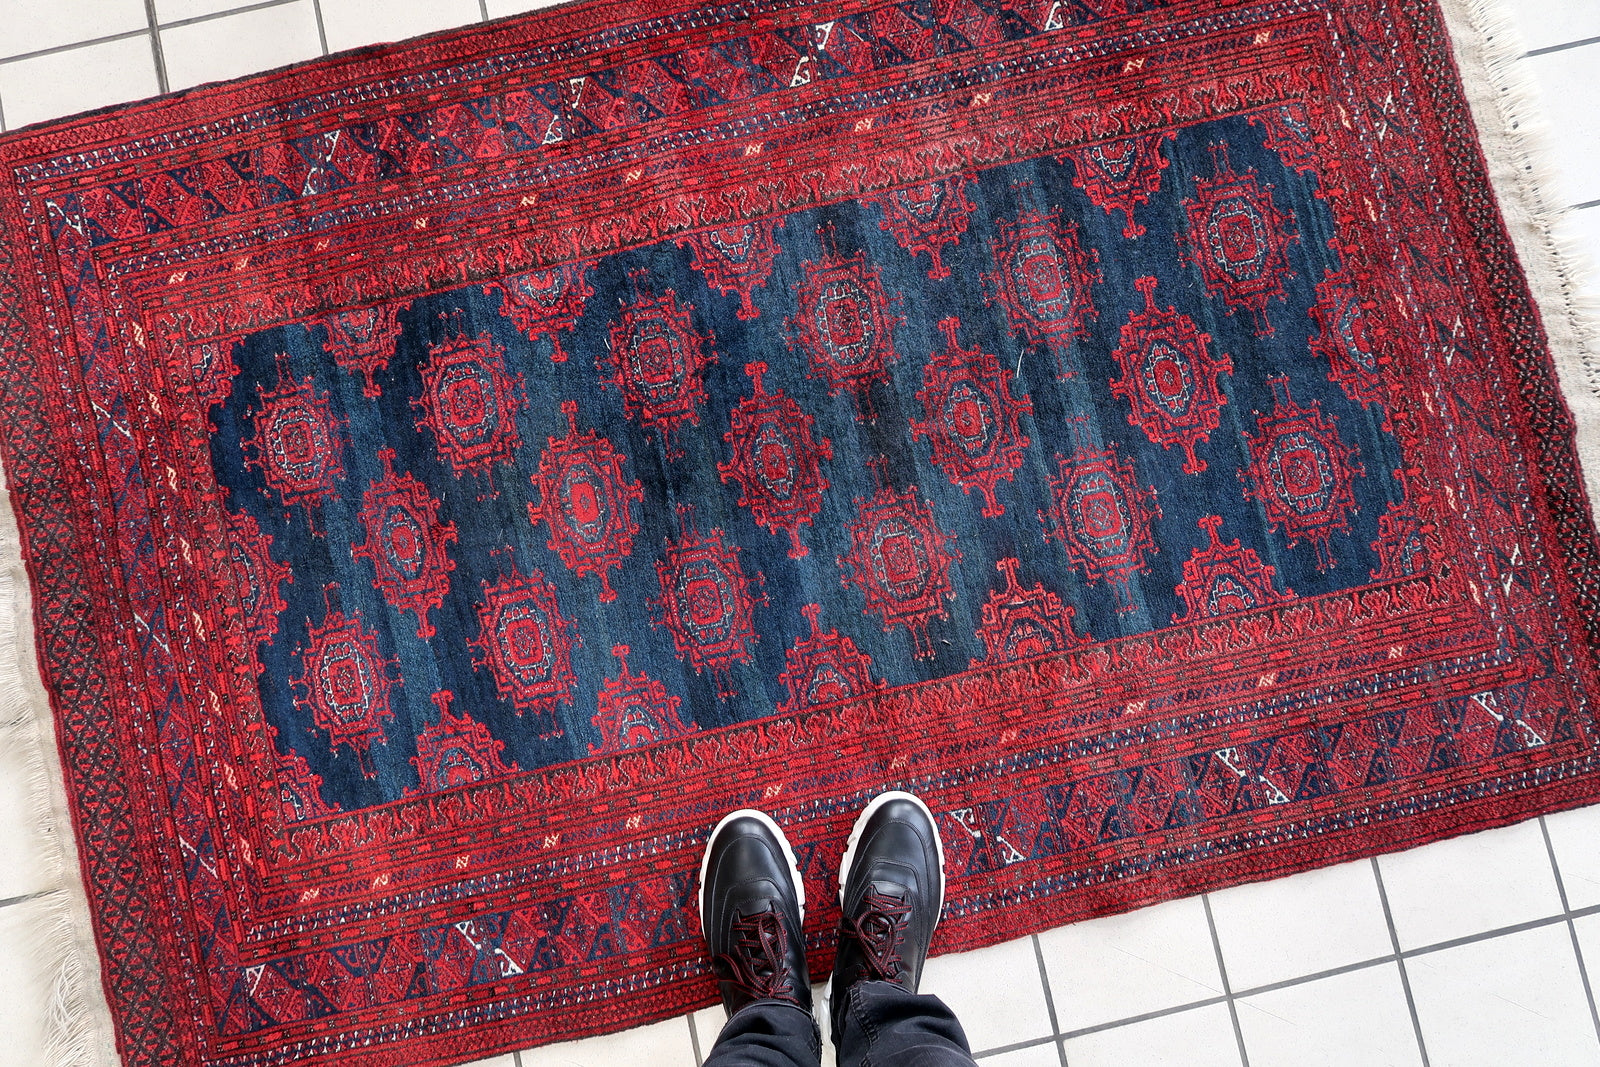 Handmade vintage Afghan Baluch rug in bright red and dark blue shades. The rug is from the middle of 20th century in original good condition.